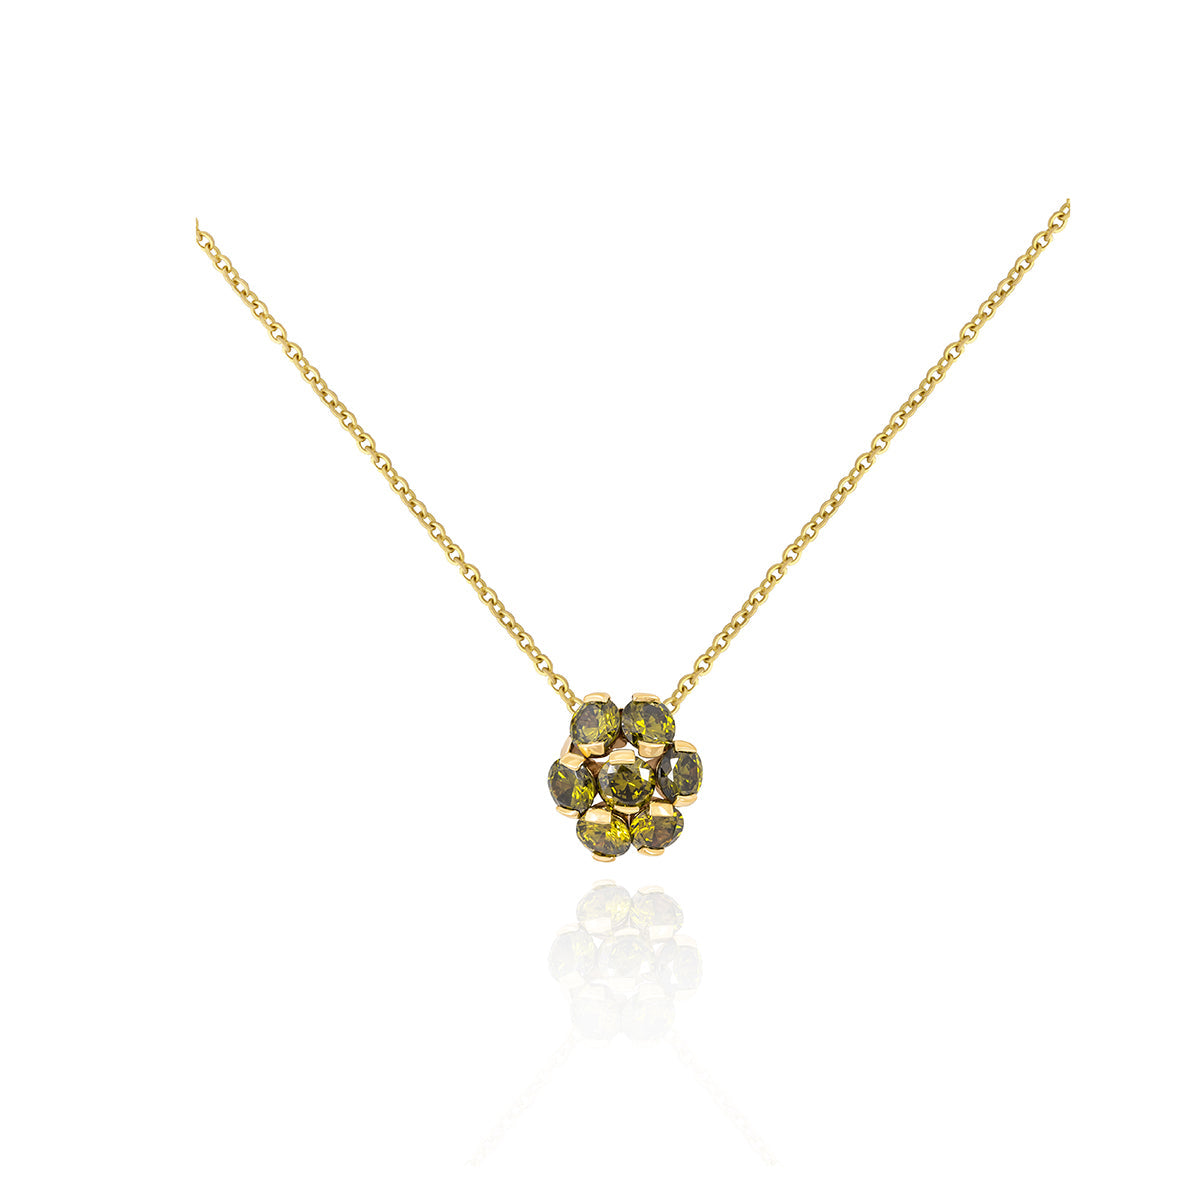 Cluster Flower Necklace in 18k yellow Gold | El Mawardy Jewelry 